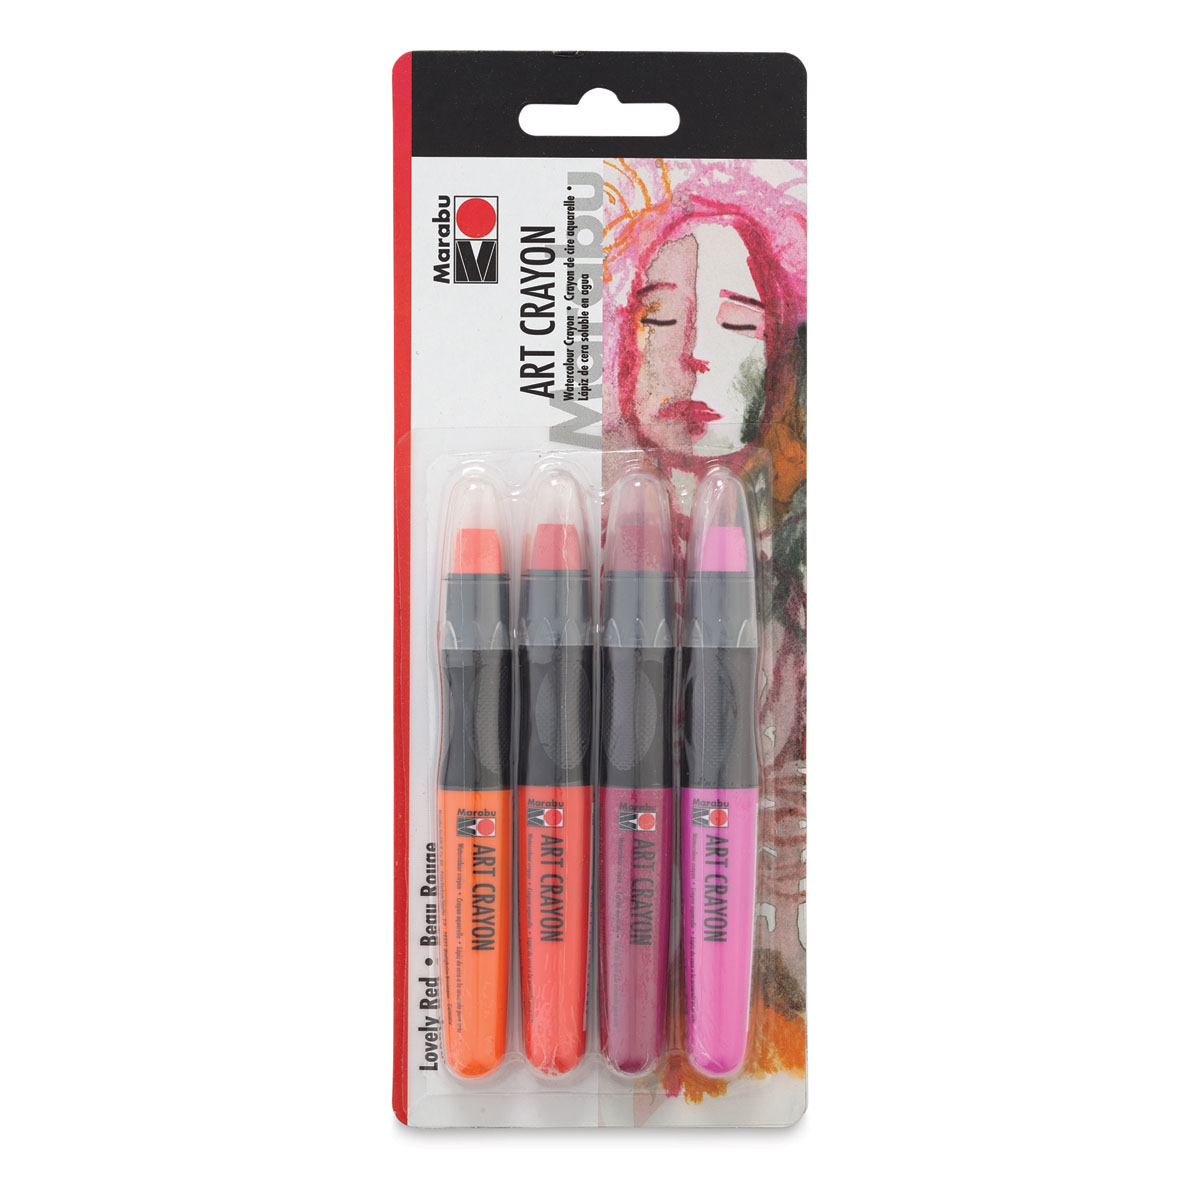 Marabu Watercolor Crayons Set - 26 Buttery Smooth Art Crayons - Ignite Your Imagination with Vivid Water Soluble Crayons for Mixed Media Journals 